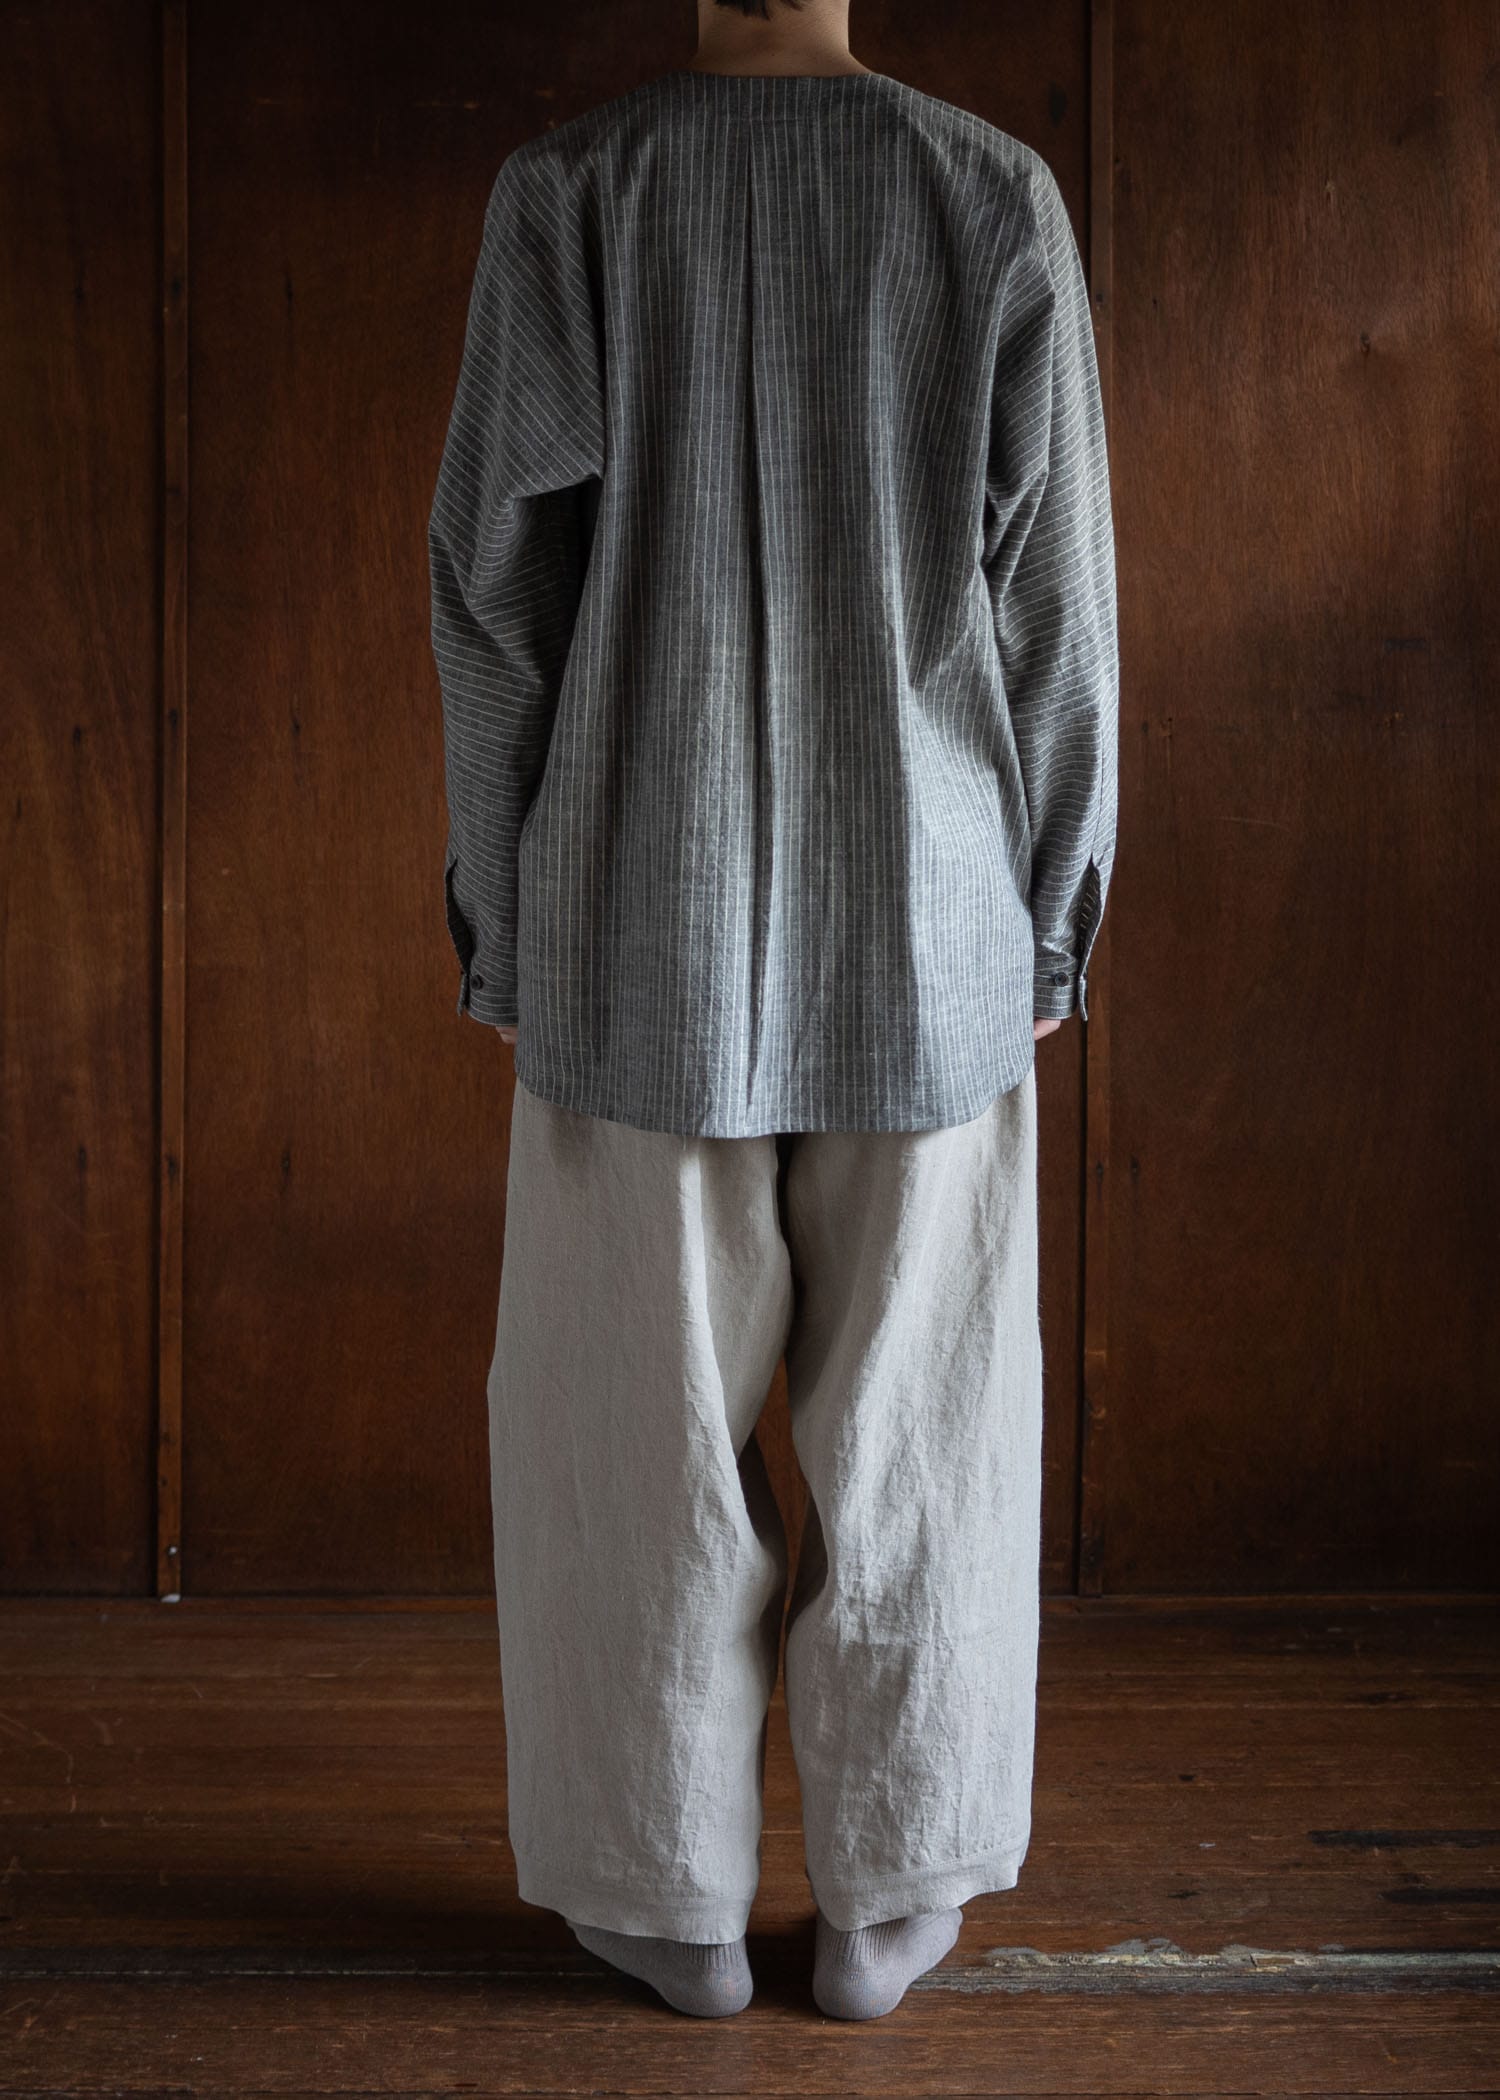 JAN-JAN VAN ESSCHE TROUSERS#80 LOOSE FIT LOW CROTCH TROUSERS WITH ELASTIC WAISTBAND HEMP CLOTH NATURAL